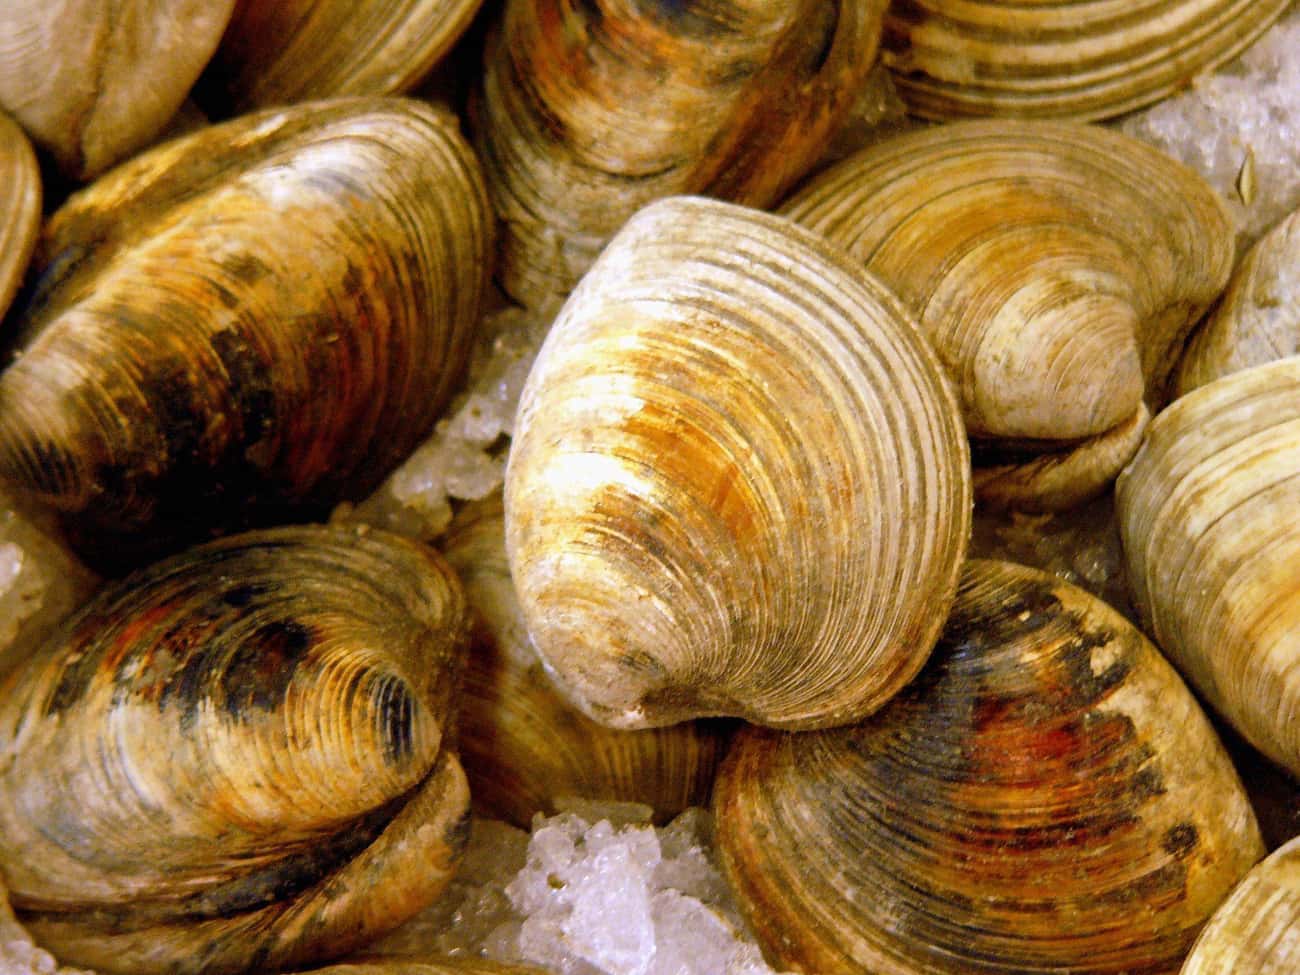 A Research Project Accidentally Killed Ming, The World’s Oldest Clam